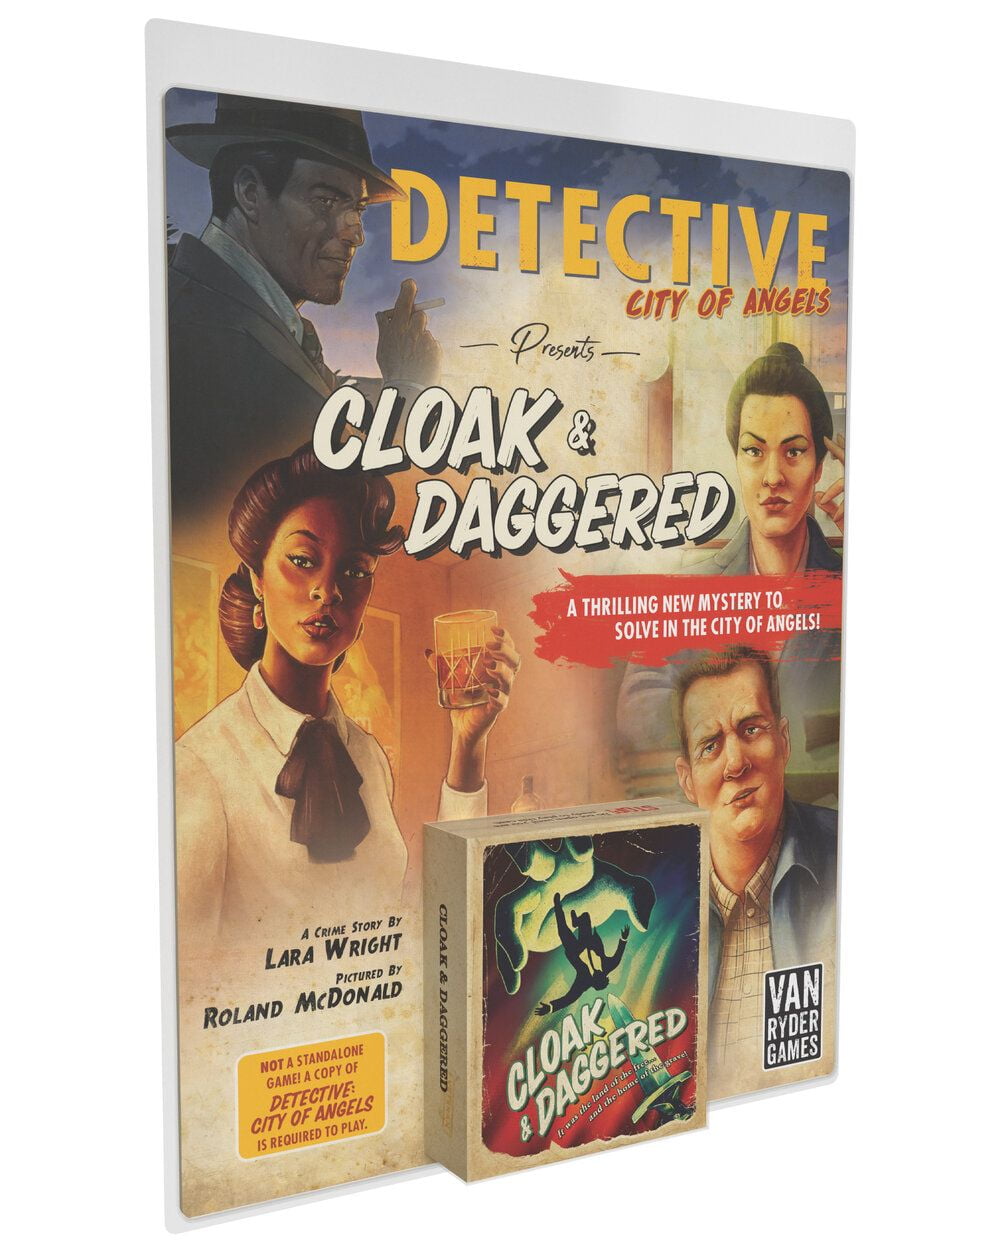 Detective: City of Angels: Cloak & Daggered Expansion